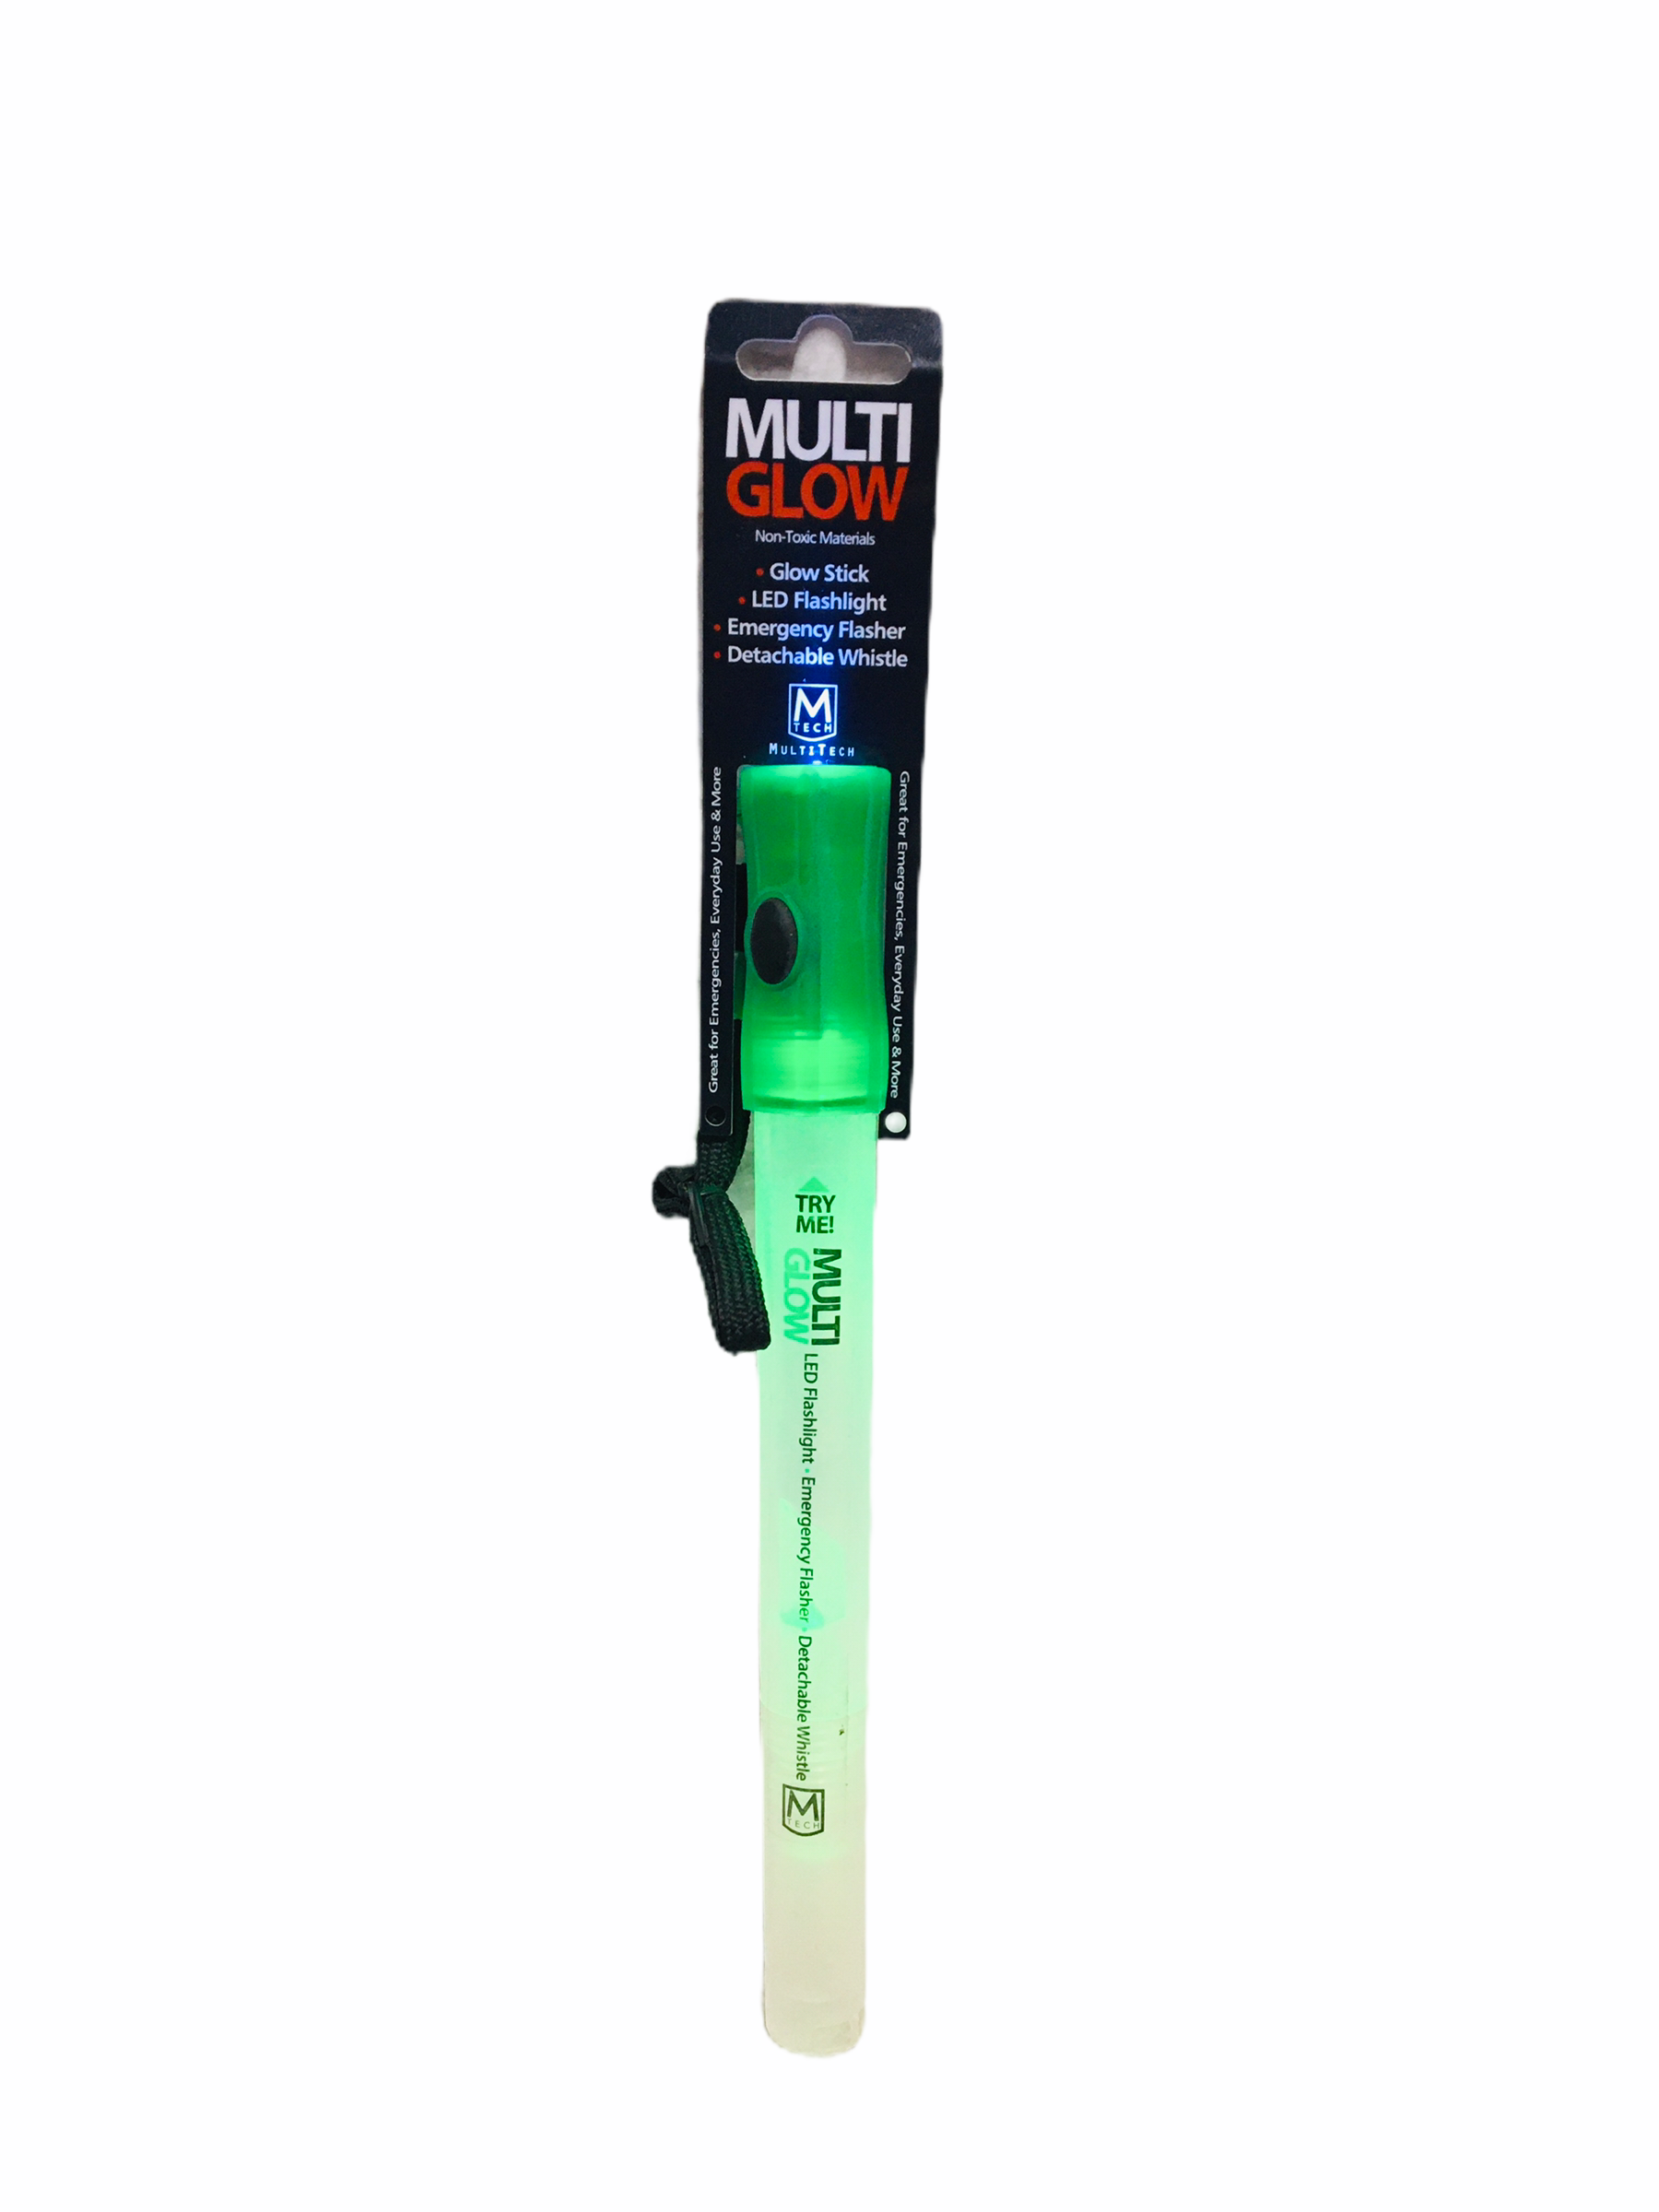 Brand new Multi-Glow LED Flashlight & Glow Stick with Emergency Flasher & Detachable Whistle! Great for Home, Auto, Camping & Boat! Batteries NOT Included! GREEN!